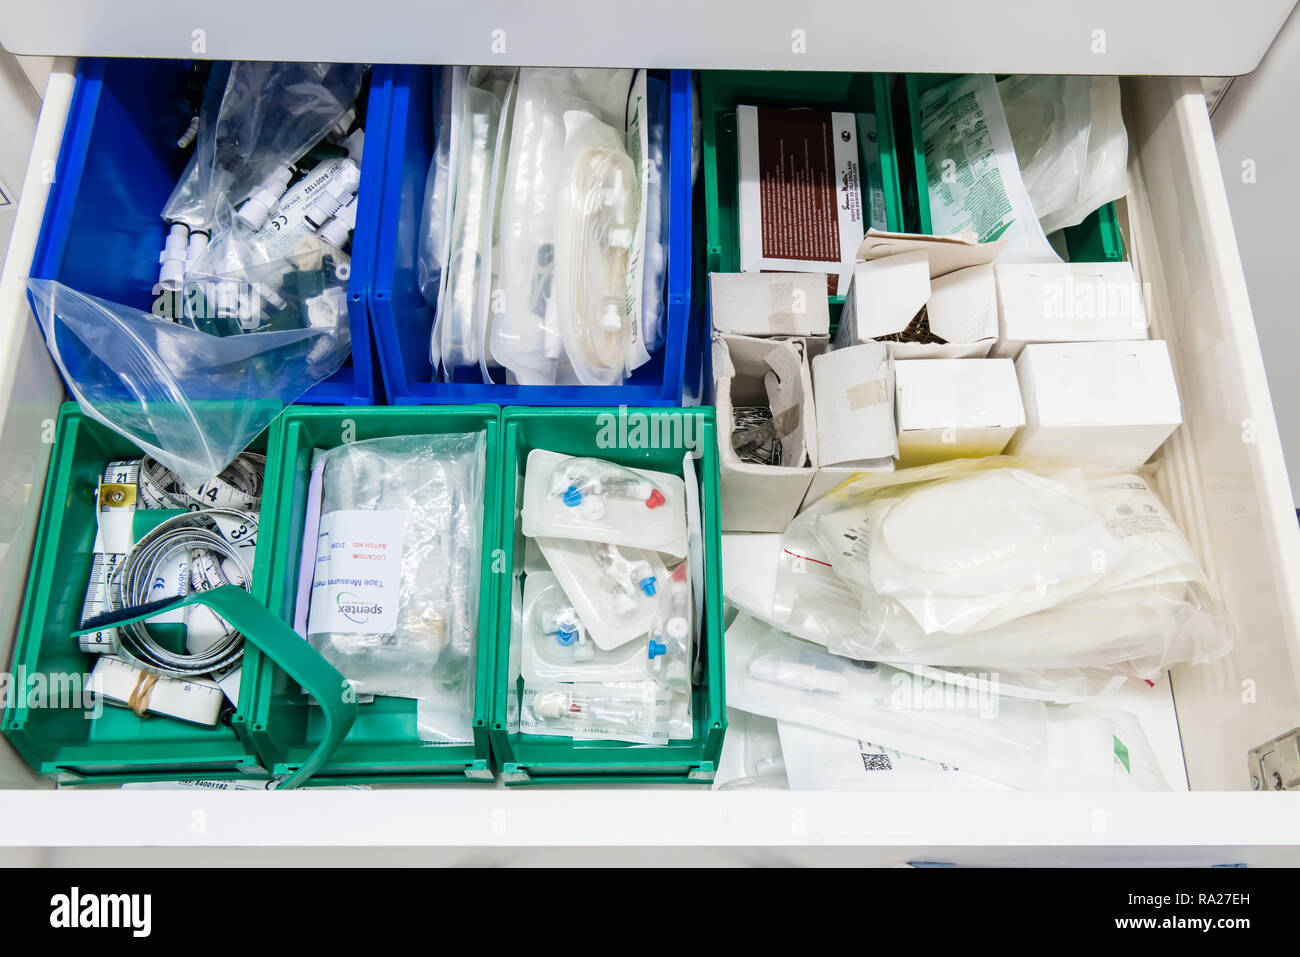 Drawer in a hospital treatment room containing equipment such as giving sets, cannulas, pads, and tape measures Stock Photo